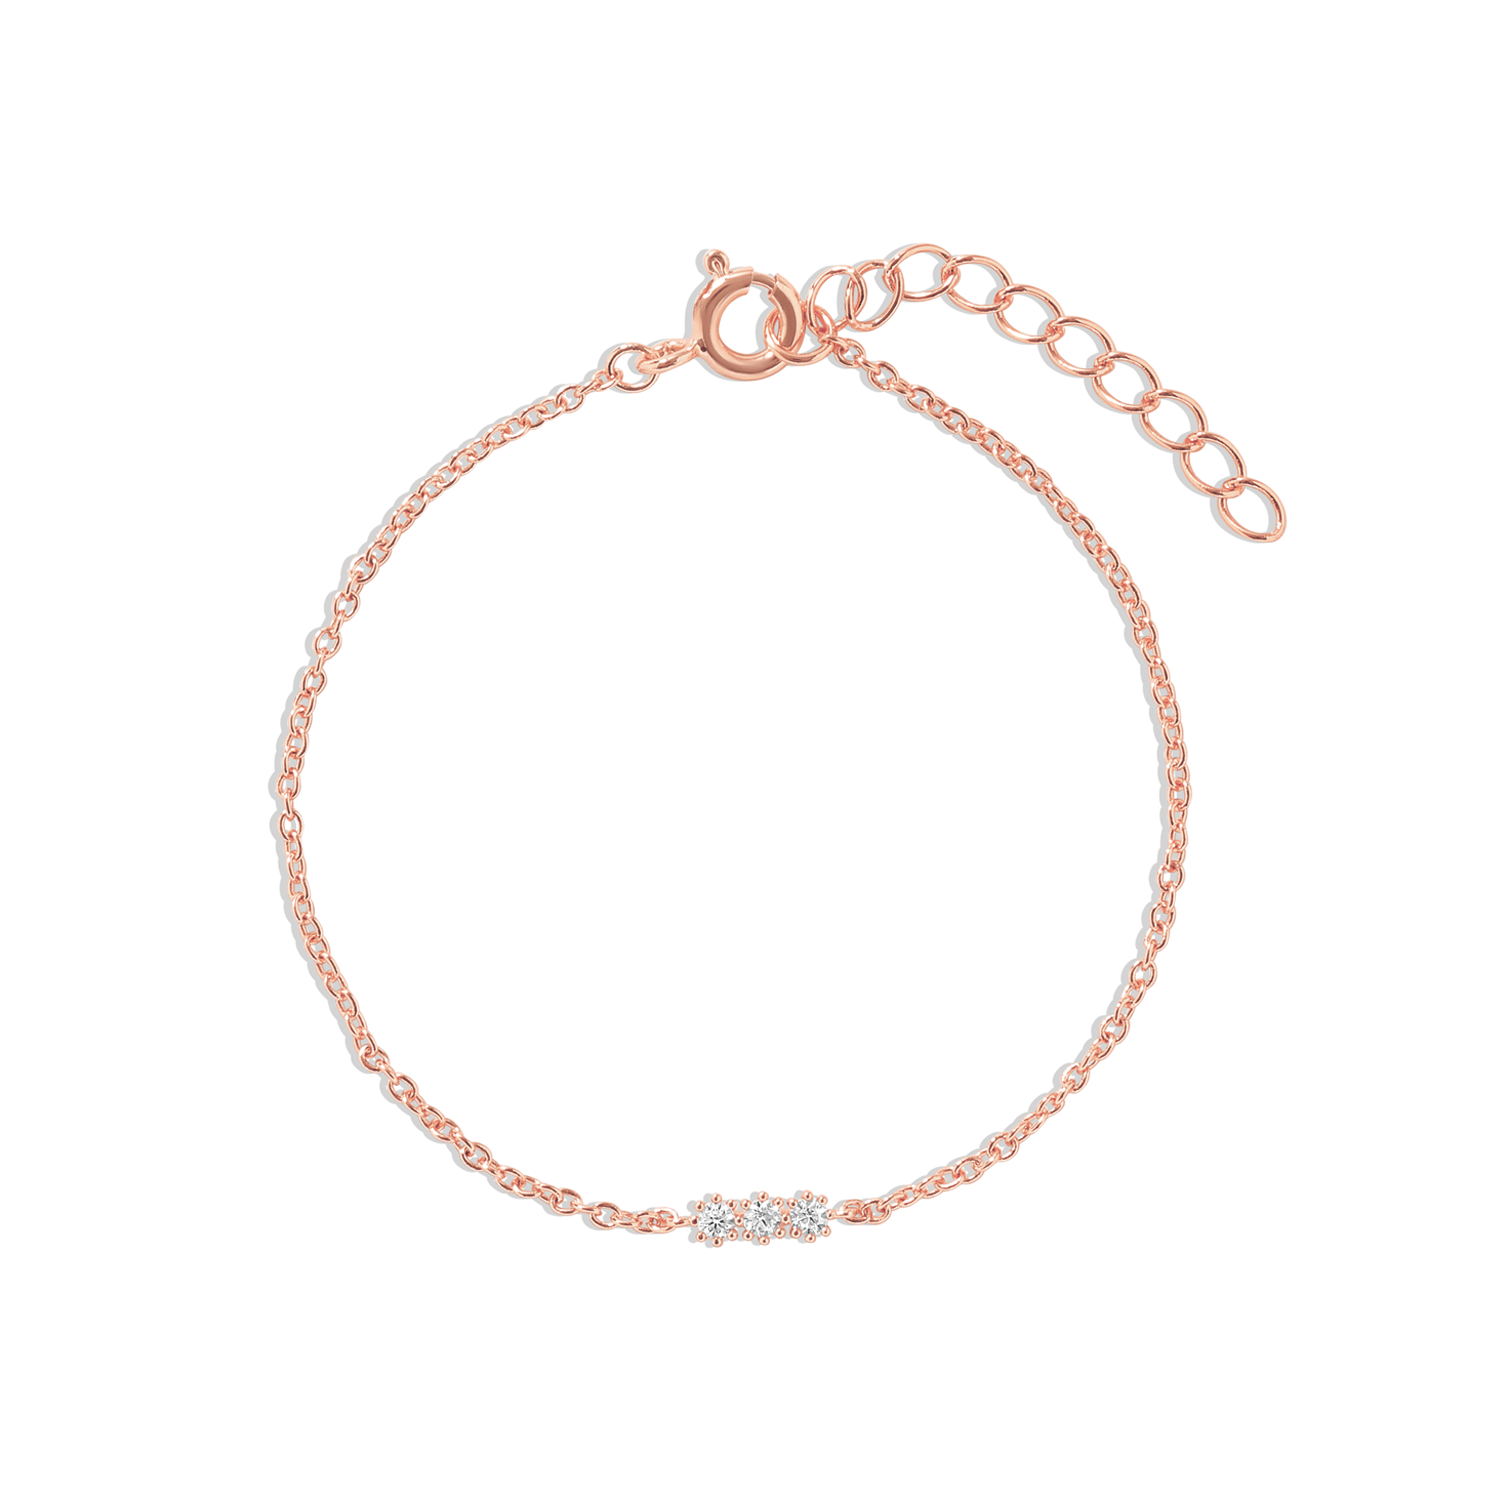 Luxurious and elegant bracelet with cubic zirconia in rose gold